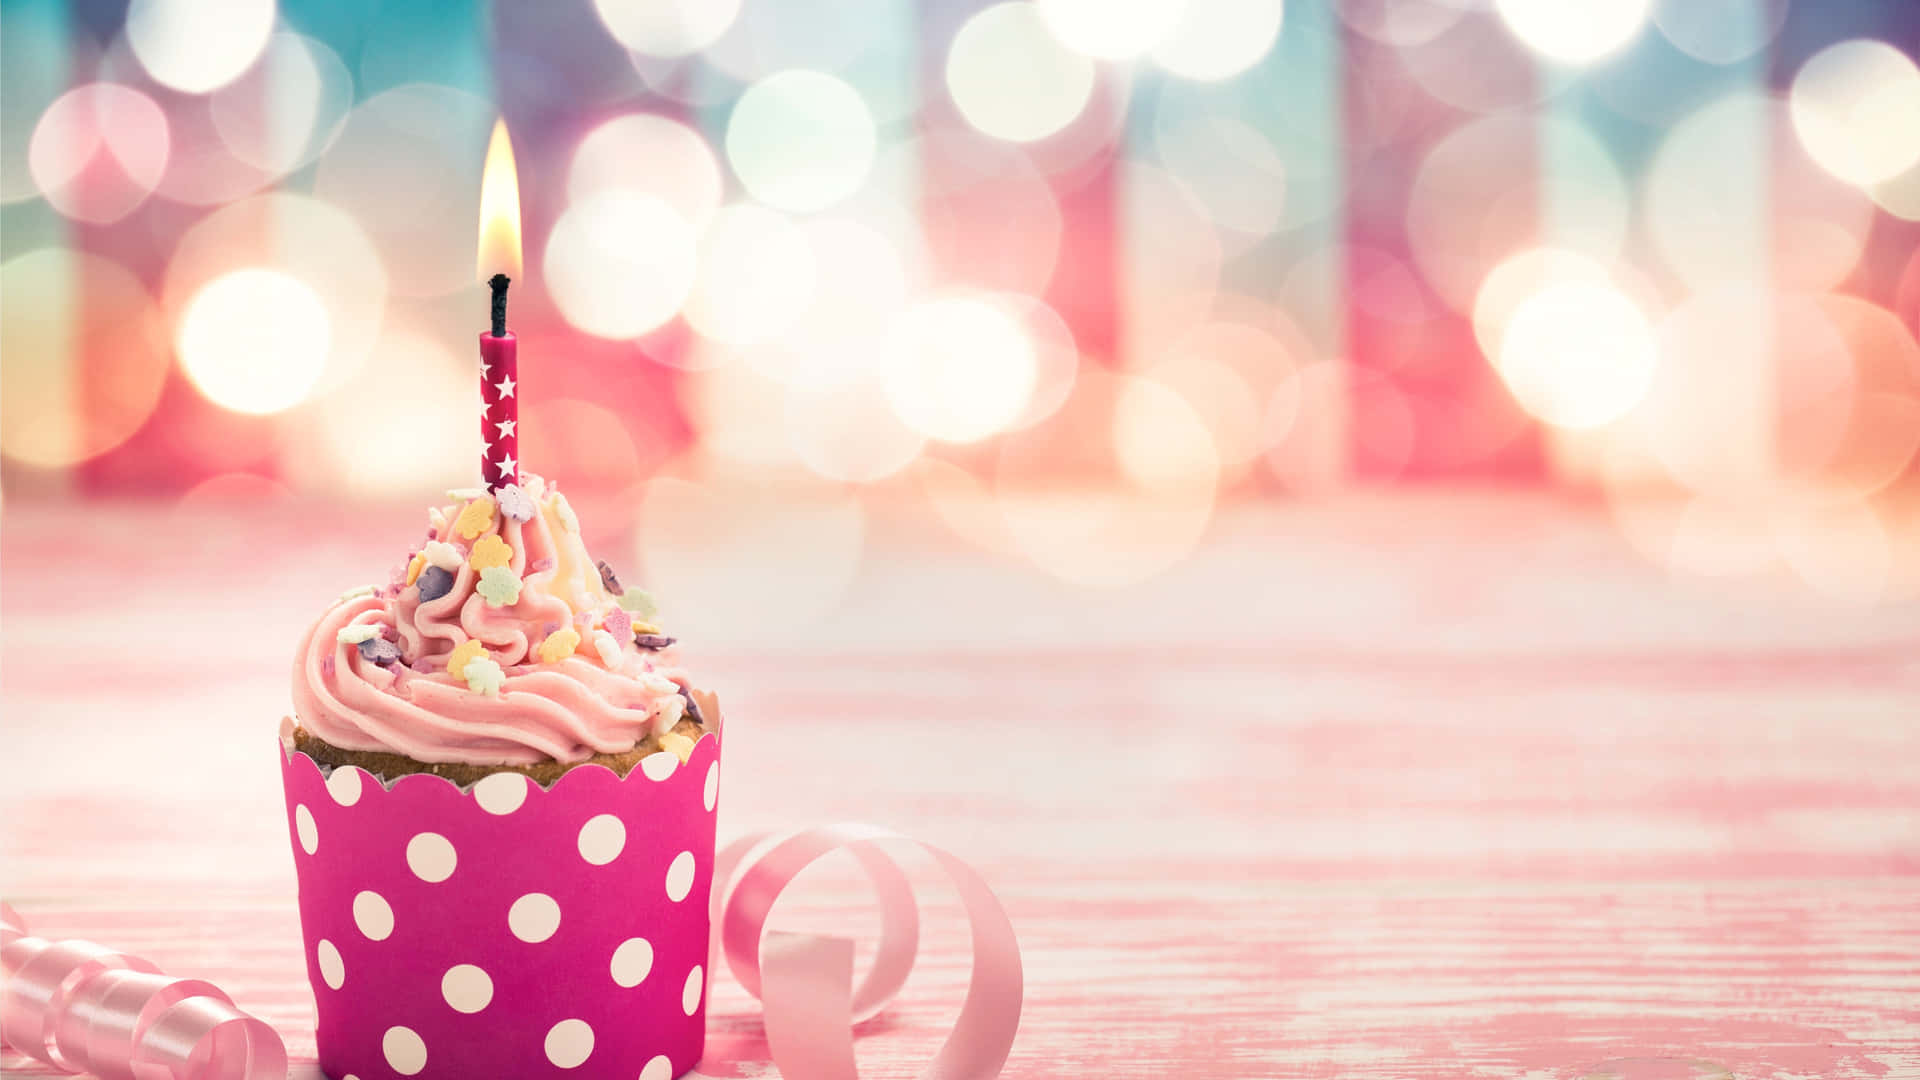 Celebrate the beautiful, joyful moments of life with a vibrant Pink Birthday! Wallpaper